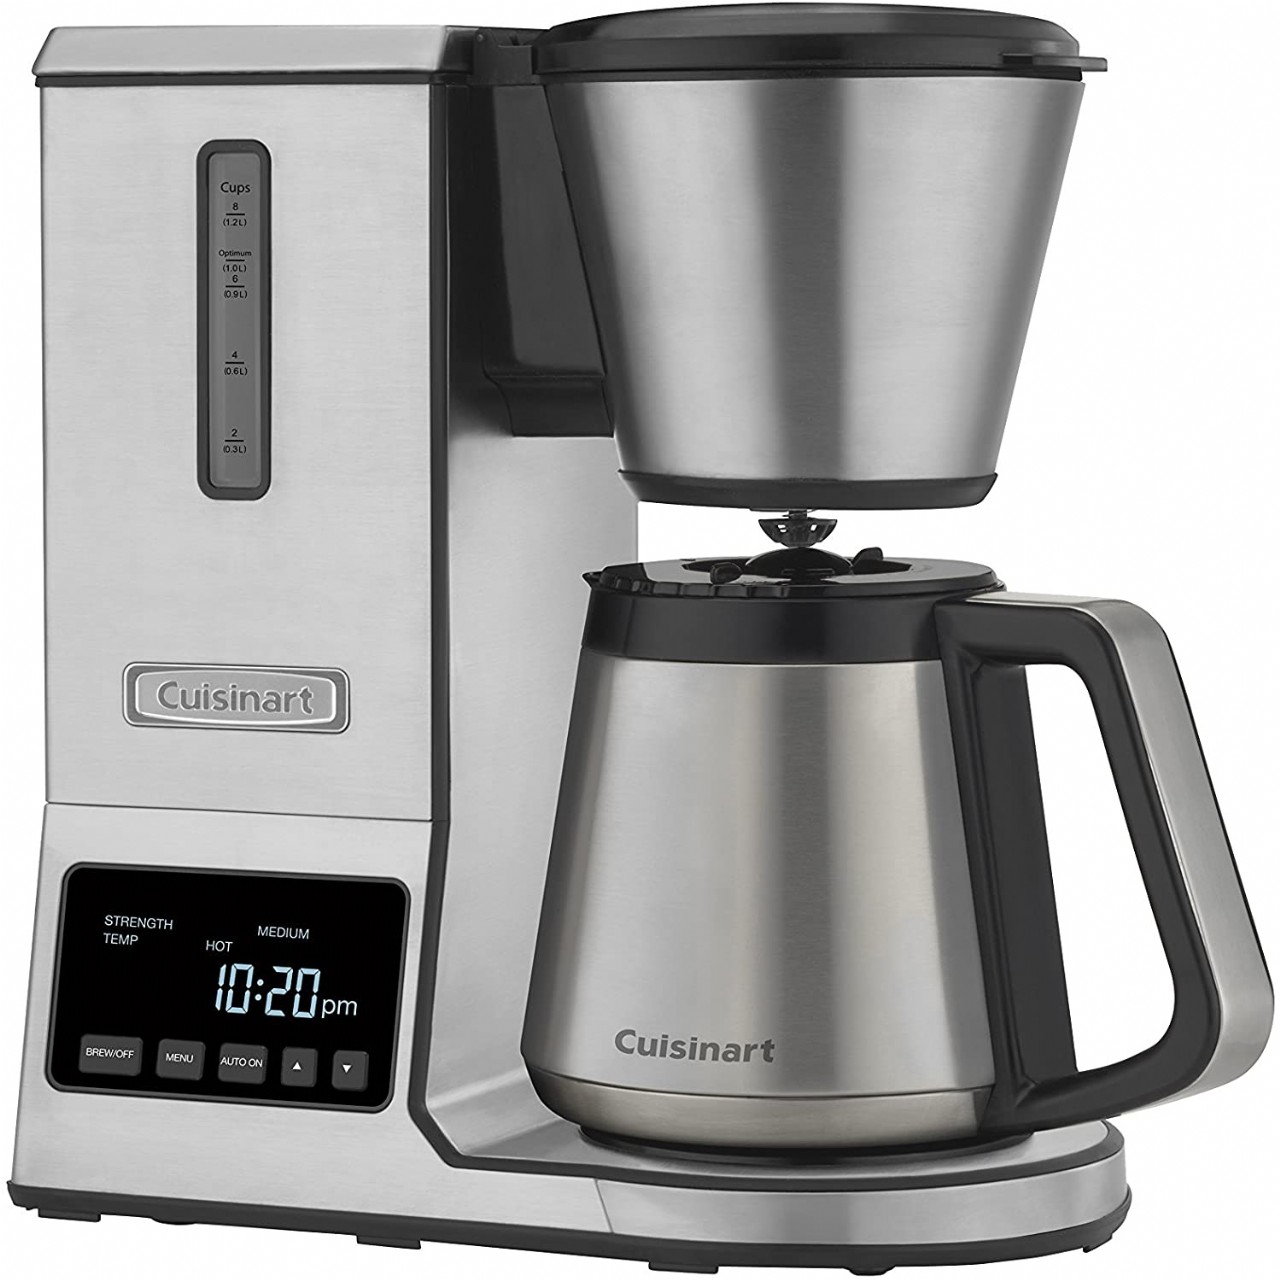 Cuisinart CPO-850 Coffee Brewer, 8 Cup, Stainless Steel